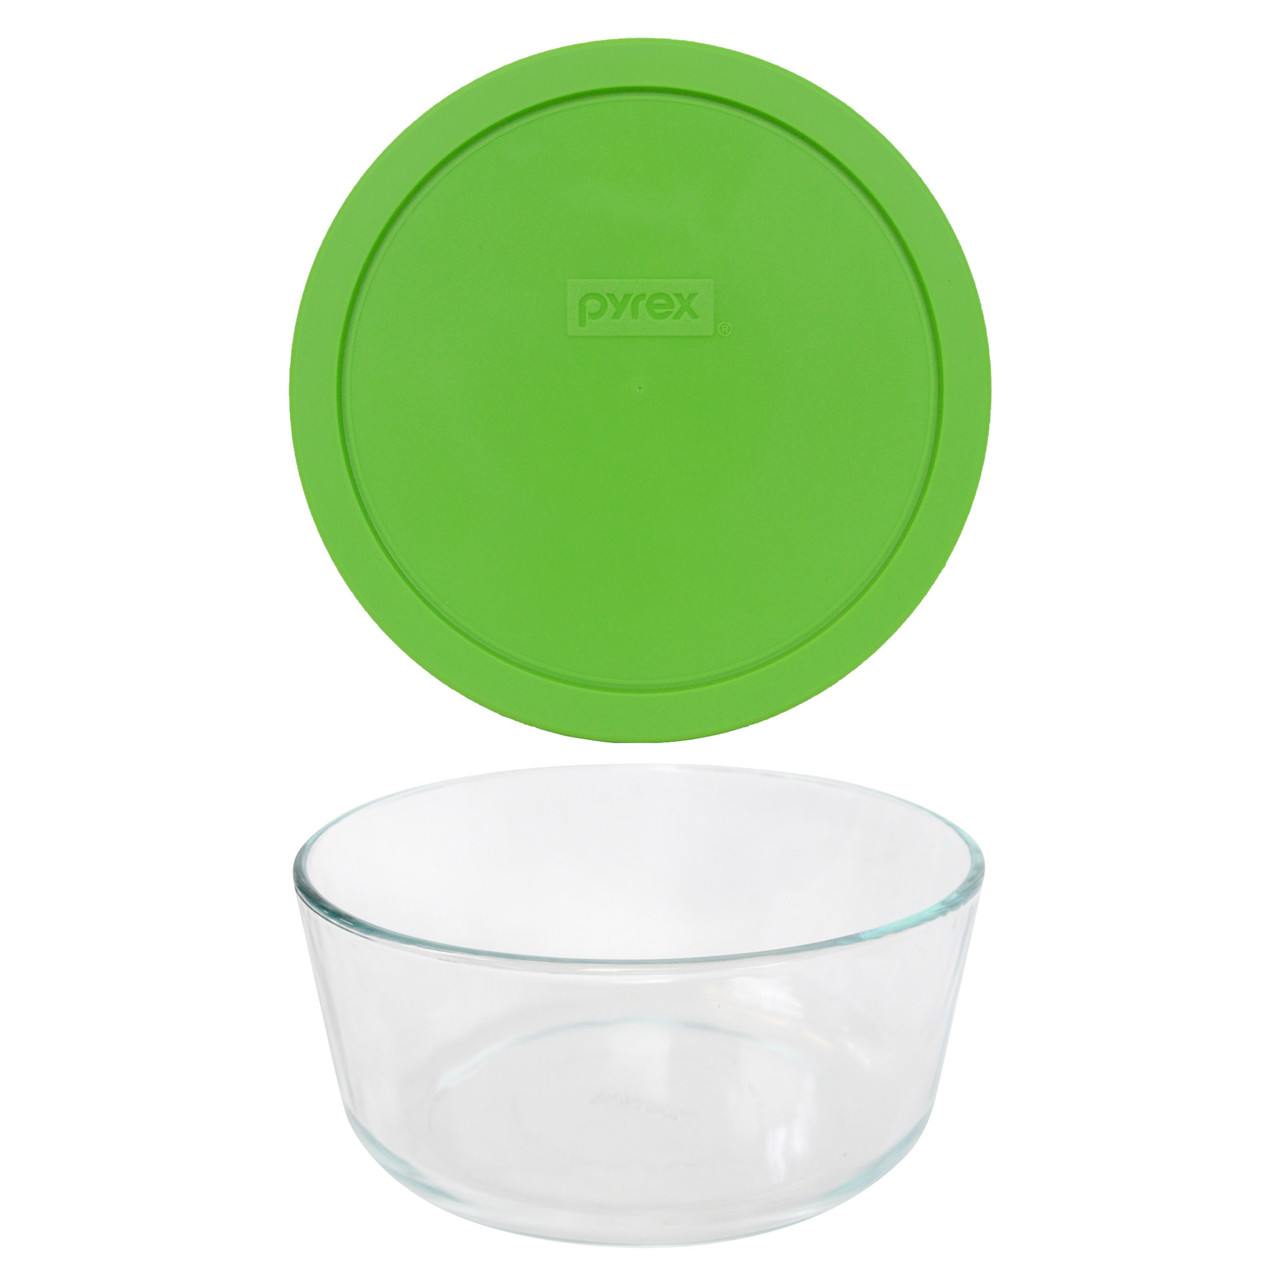 Pyrex 7-Piece Carry Out Bundle with Glass Dishes, Lids, & Hot